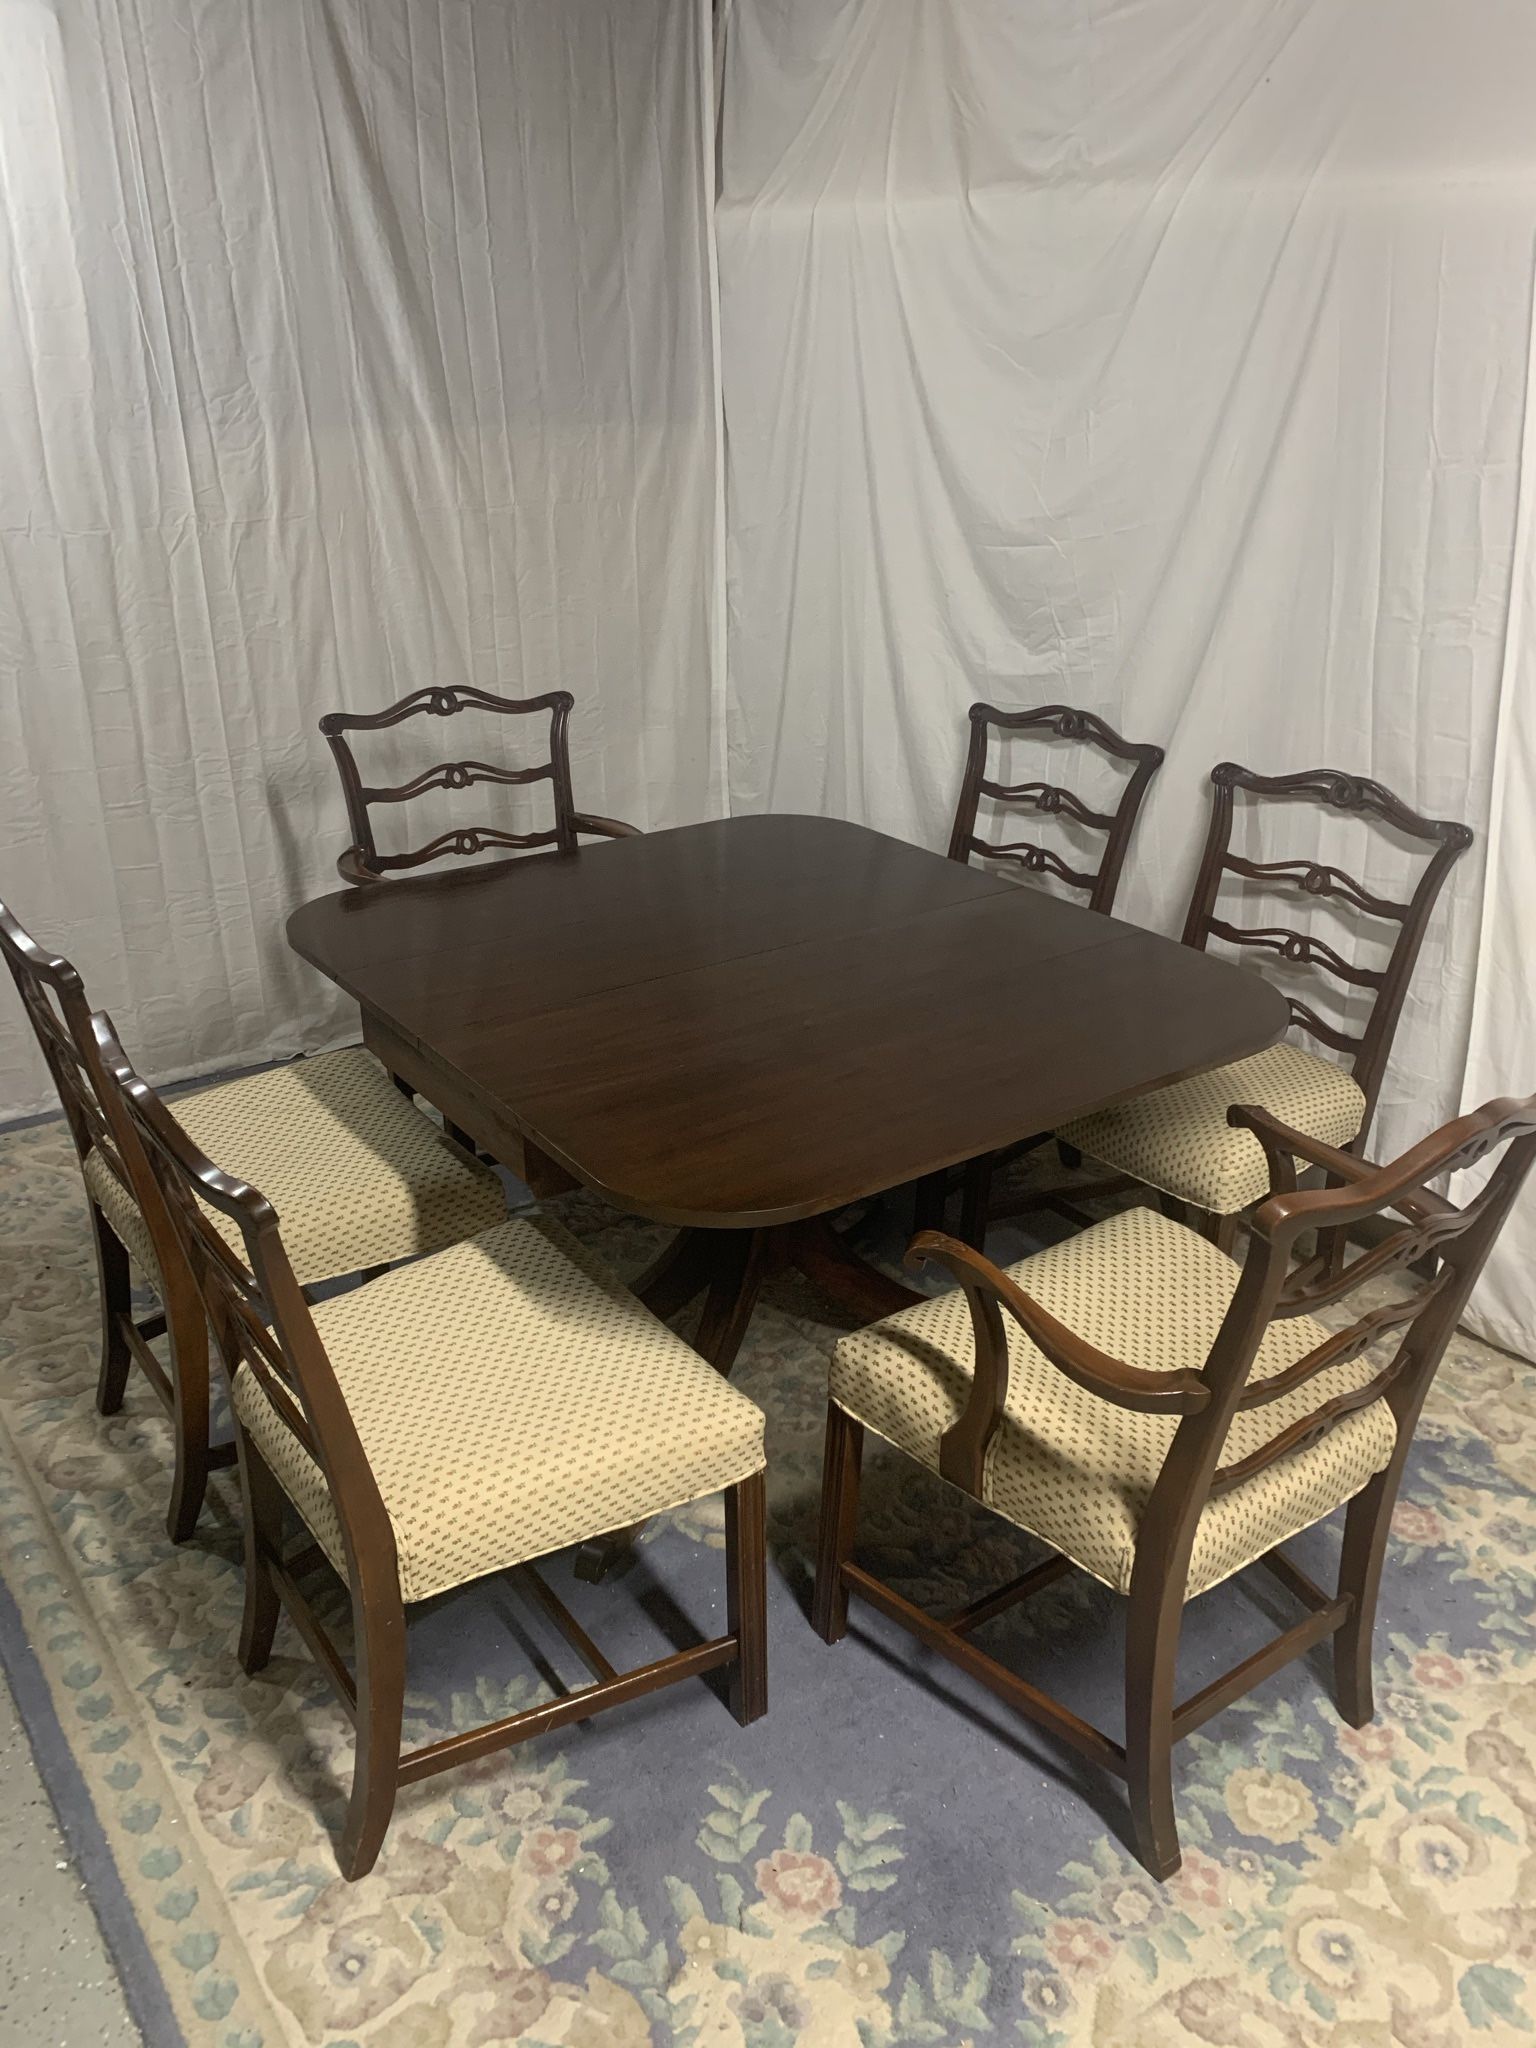 Wooden Drop-Leaf Pedestal Table w/ 6 Padded Chairs - Includes 4 Leafs & Table Protector Pads